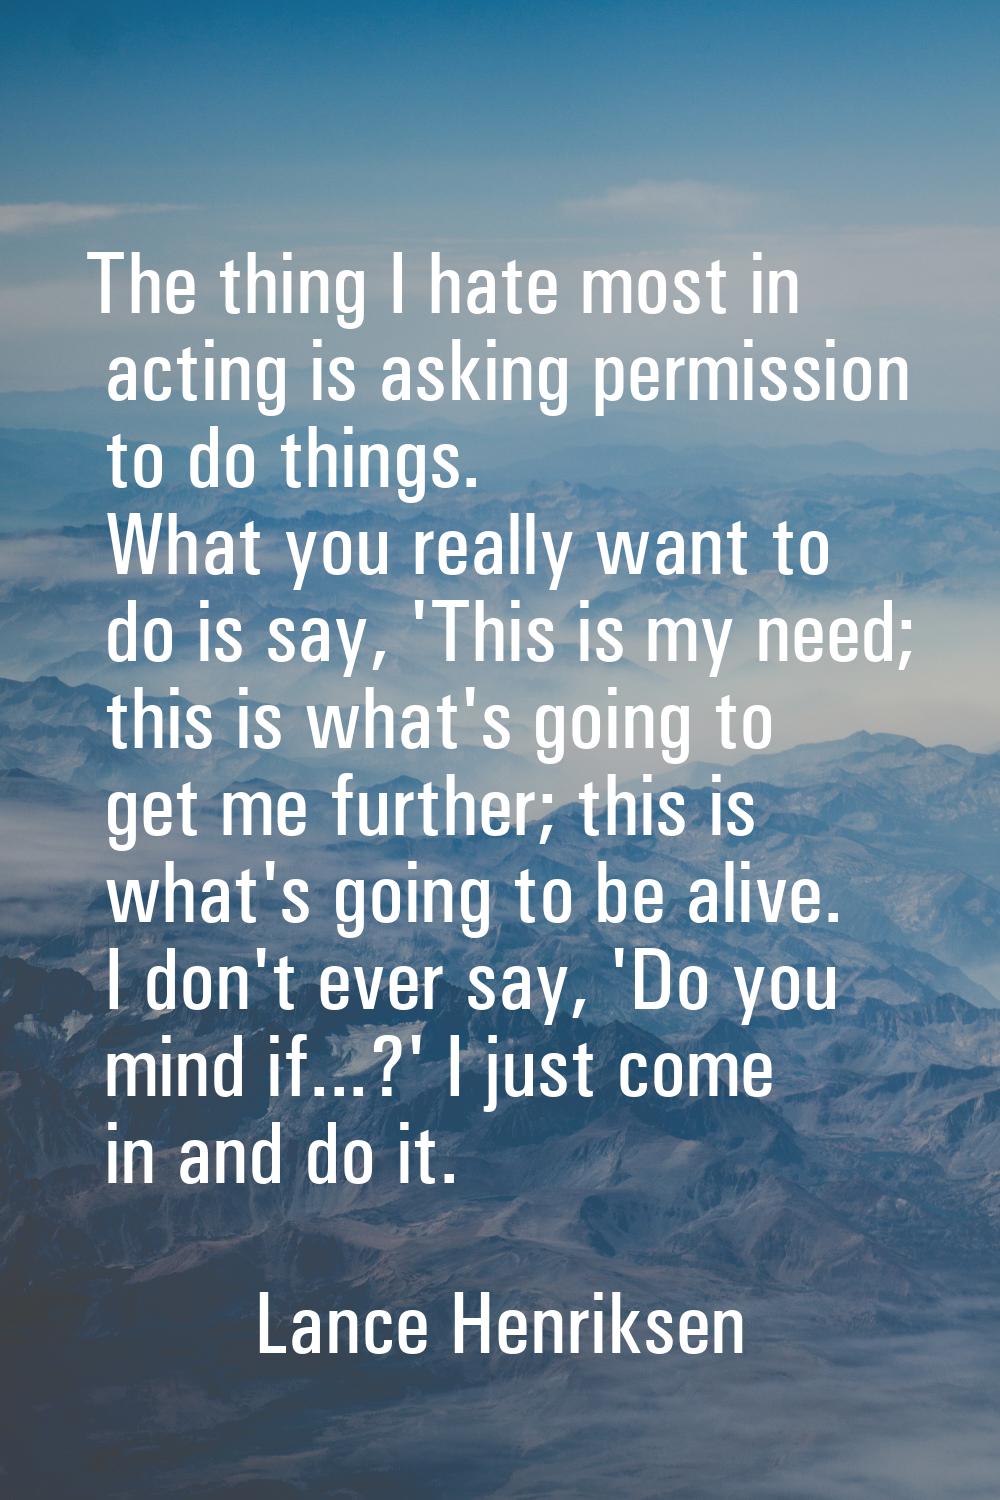 The thing I hate most in acting is asking permission to do things. What you really want to do is sa